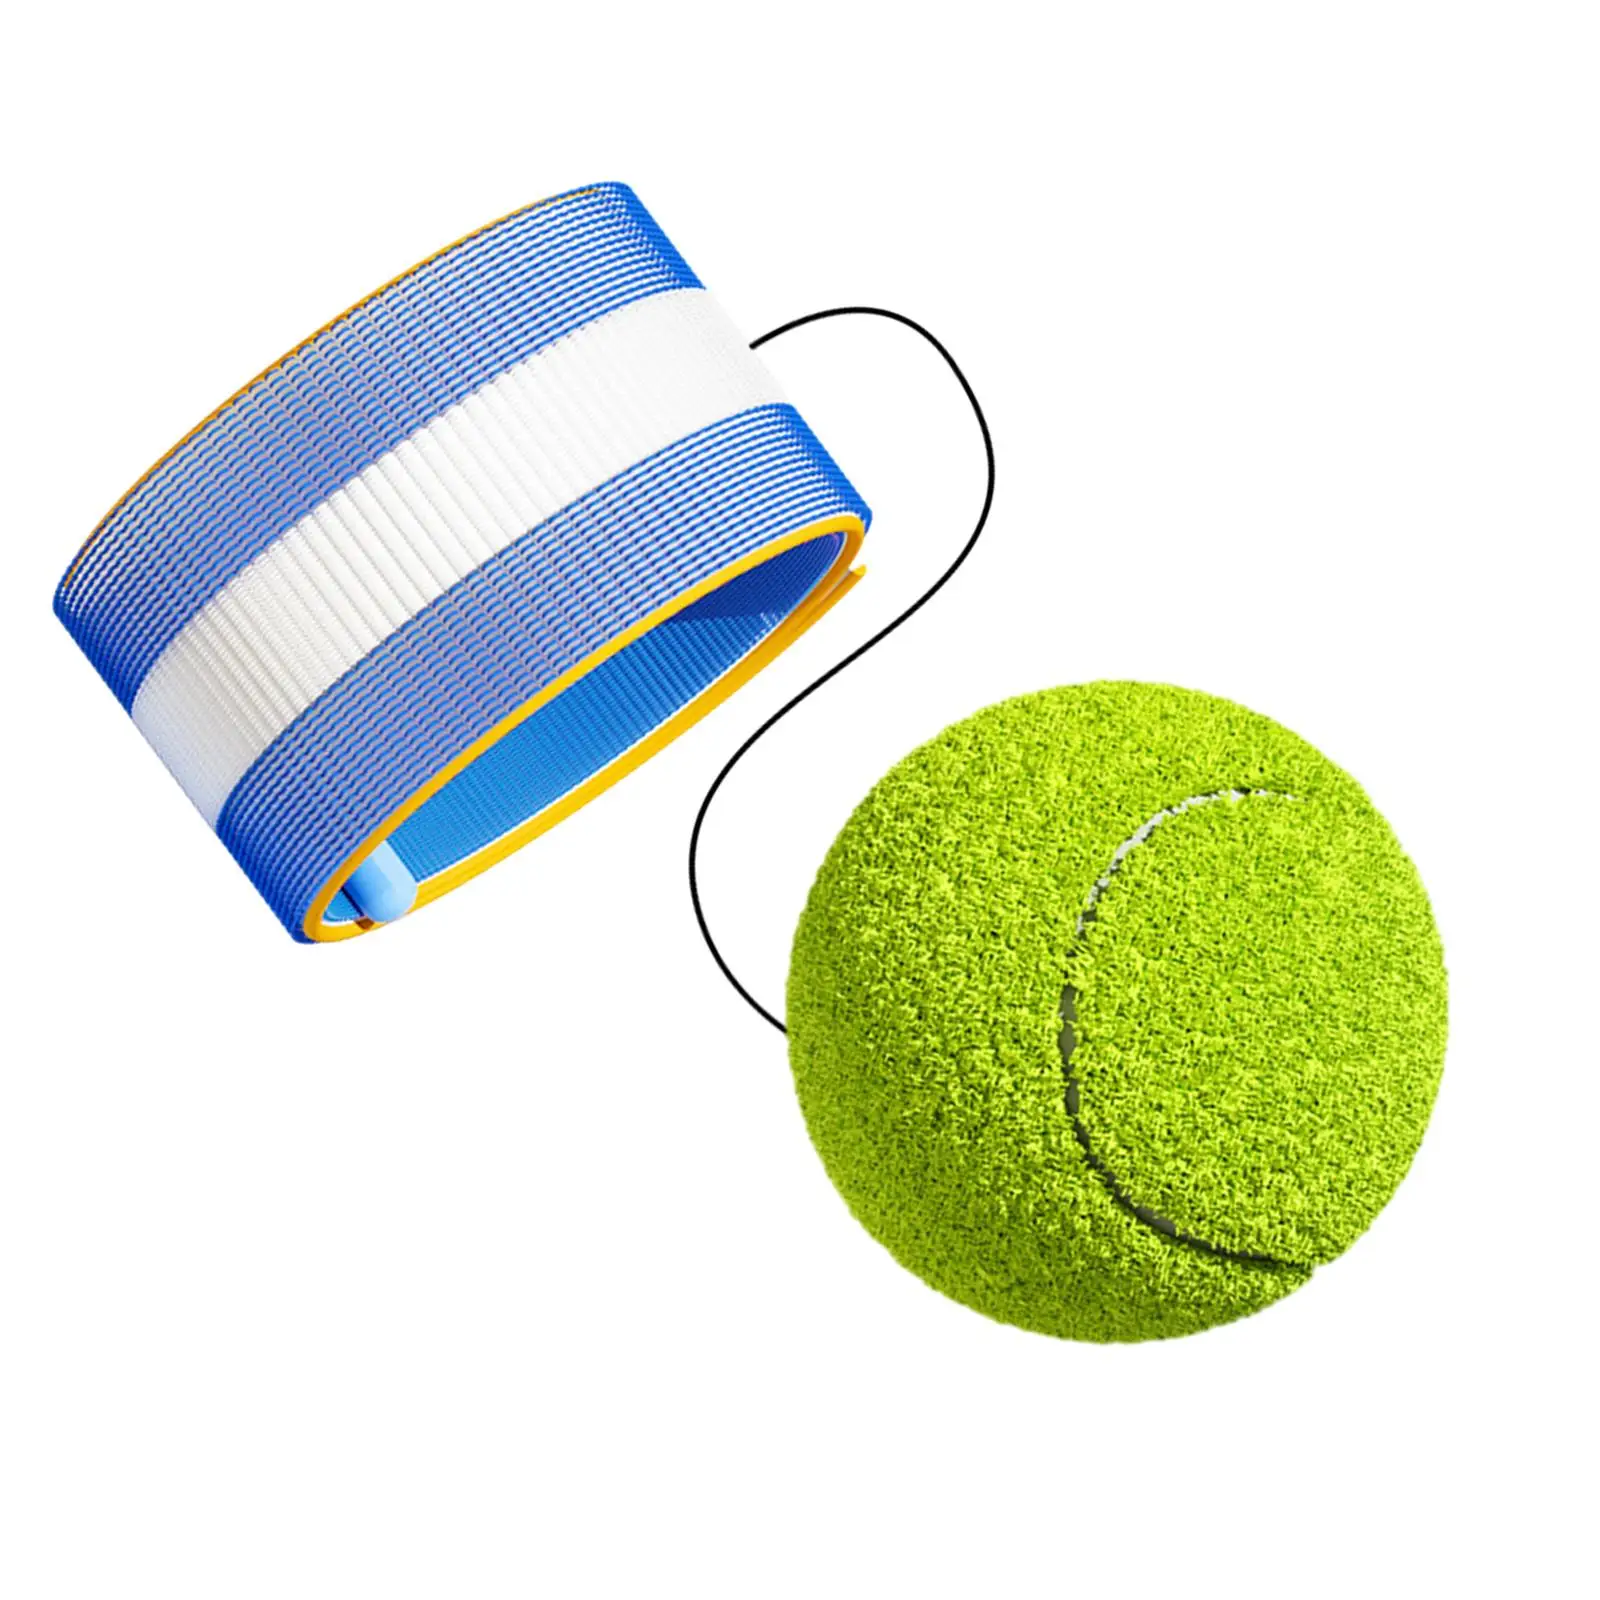 Wrist Band Ball Hand Eye Coordination Trainer Elastic Rope Wrist Balls on A String Rubber Rebound Ball for Kids Gift Party Favor